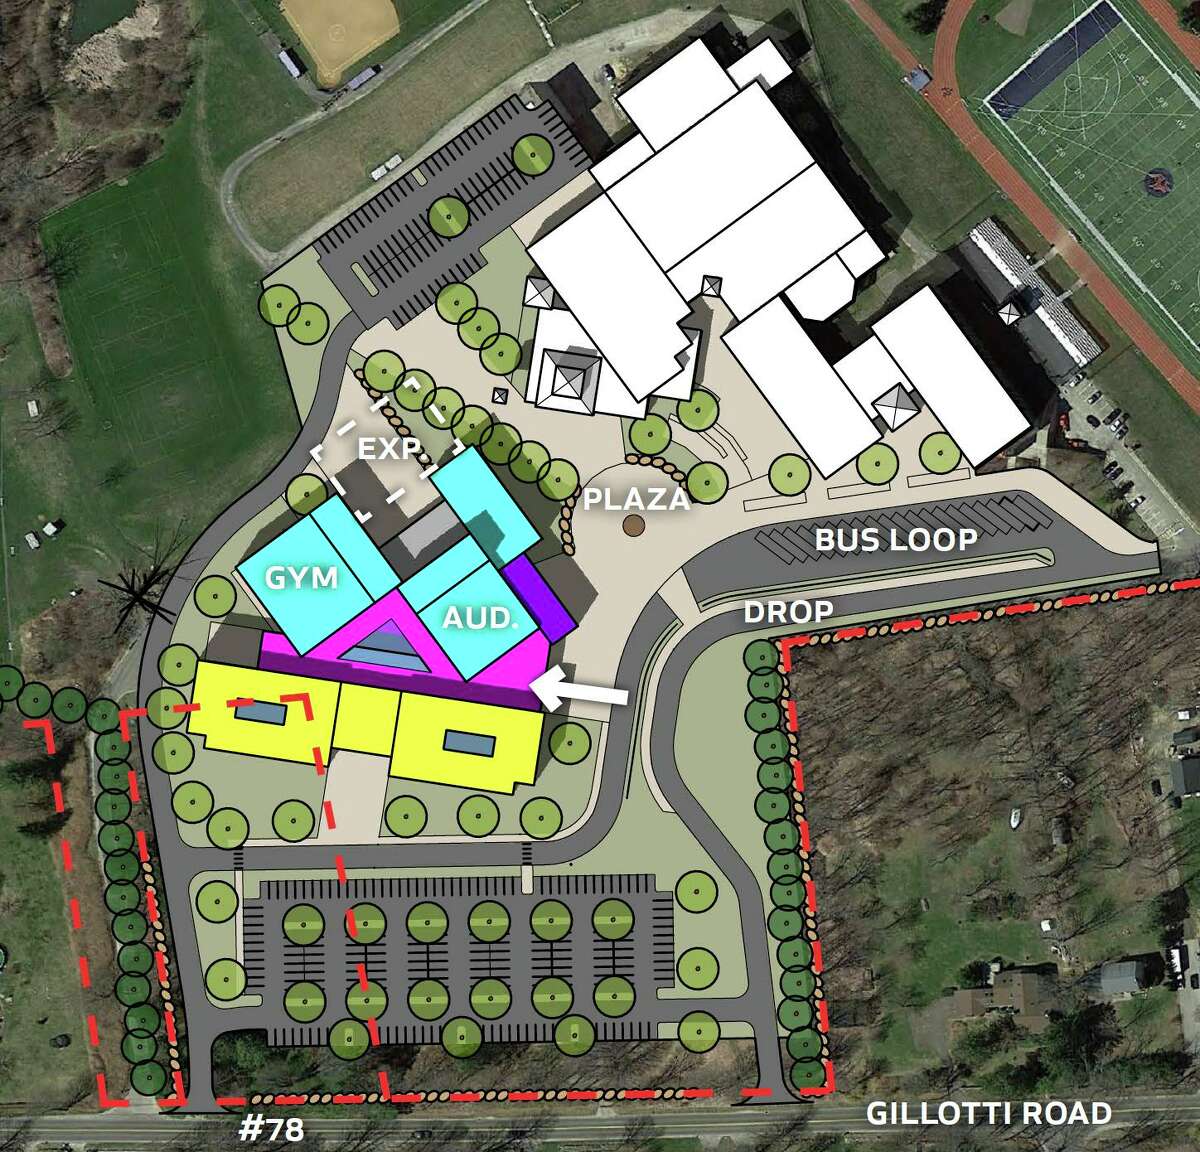 The high school construction plan utilizing the 78 Gillotti Road property.